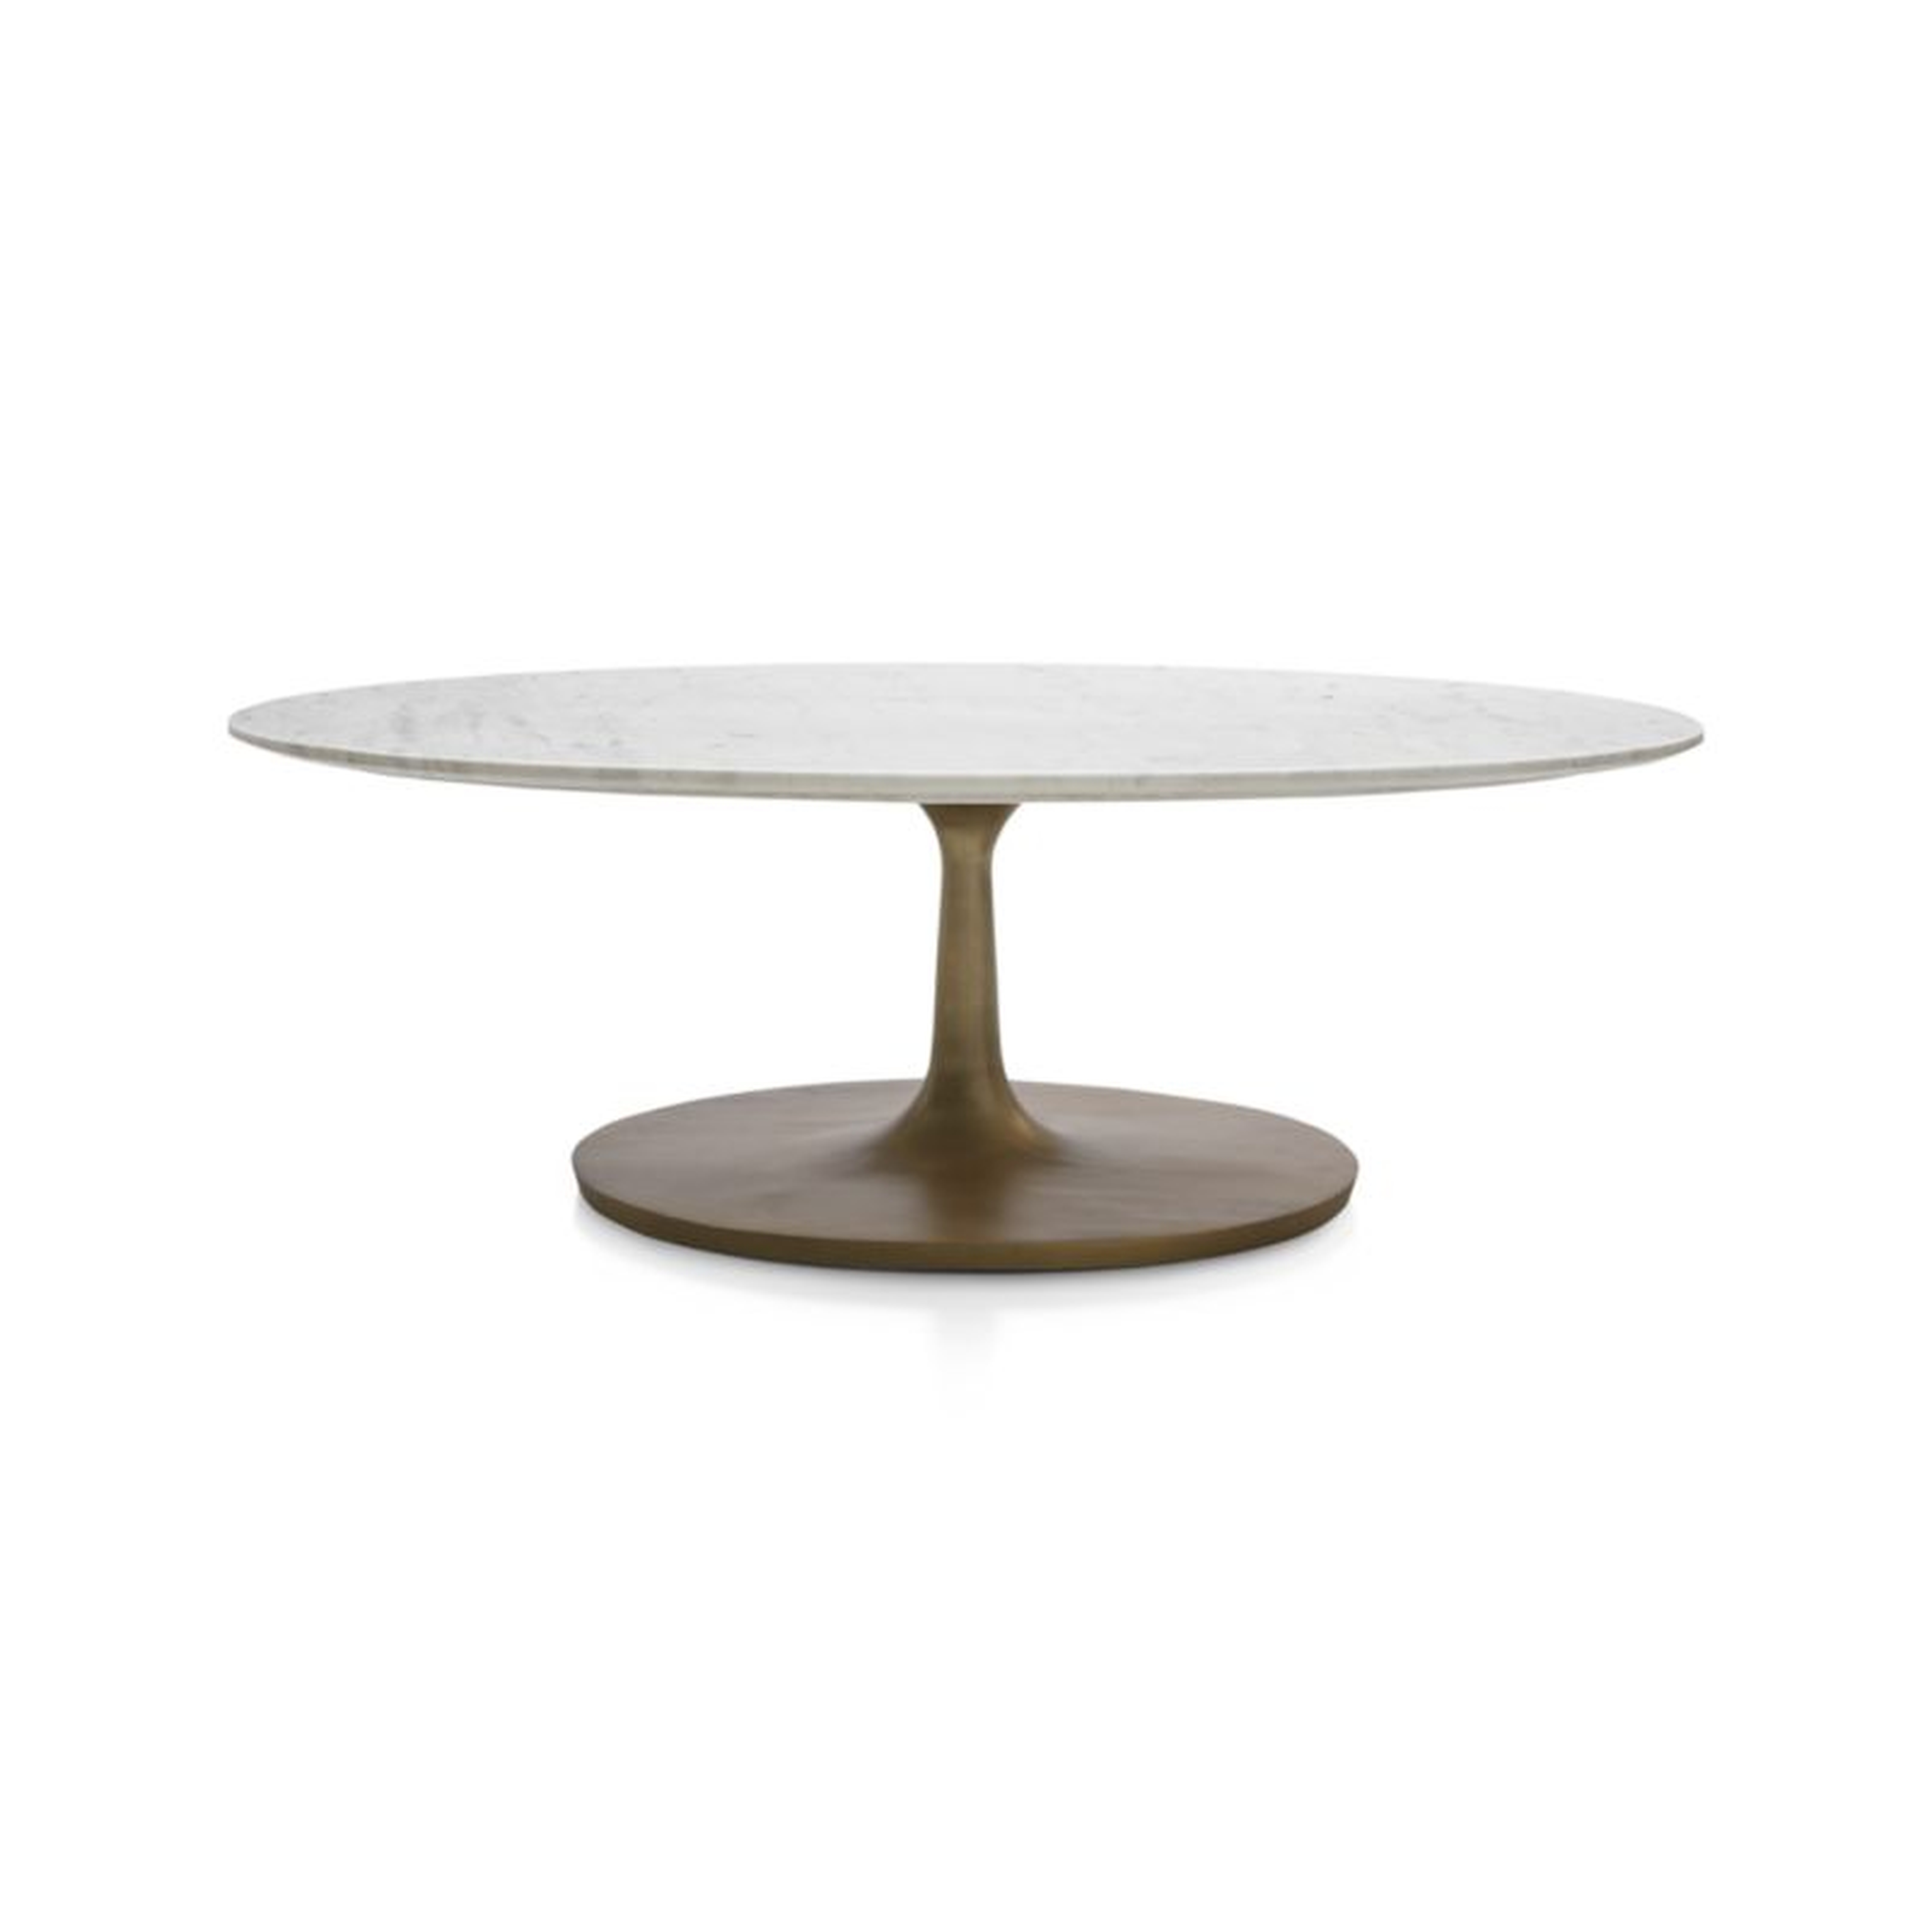 Nero White Marble and Brass Base 50" Oval Coffee Table - Crate and Barrel